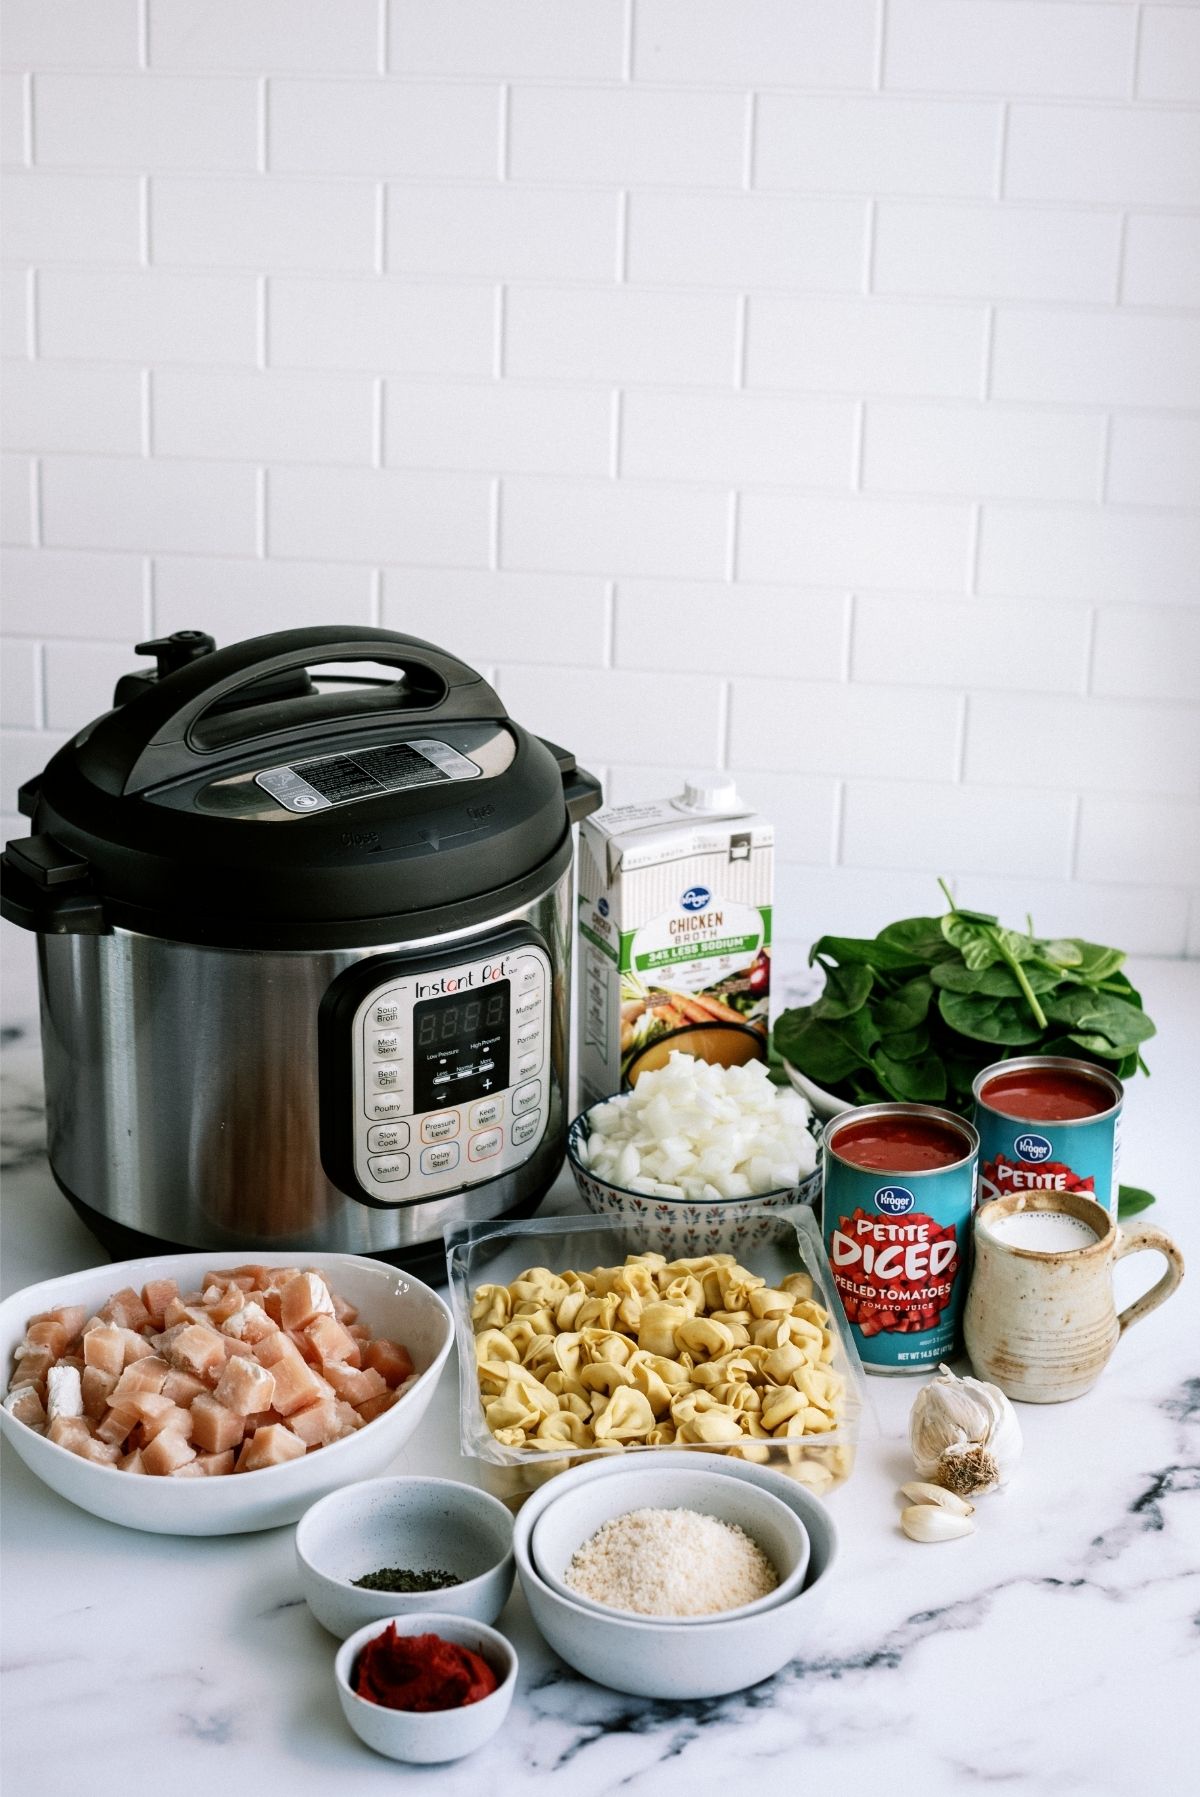 Ingredients for Instant Pot Creamy Tortellini Soup